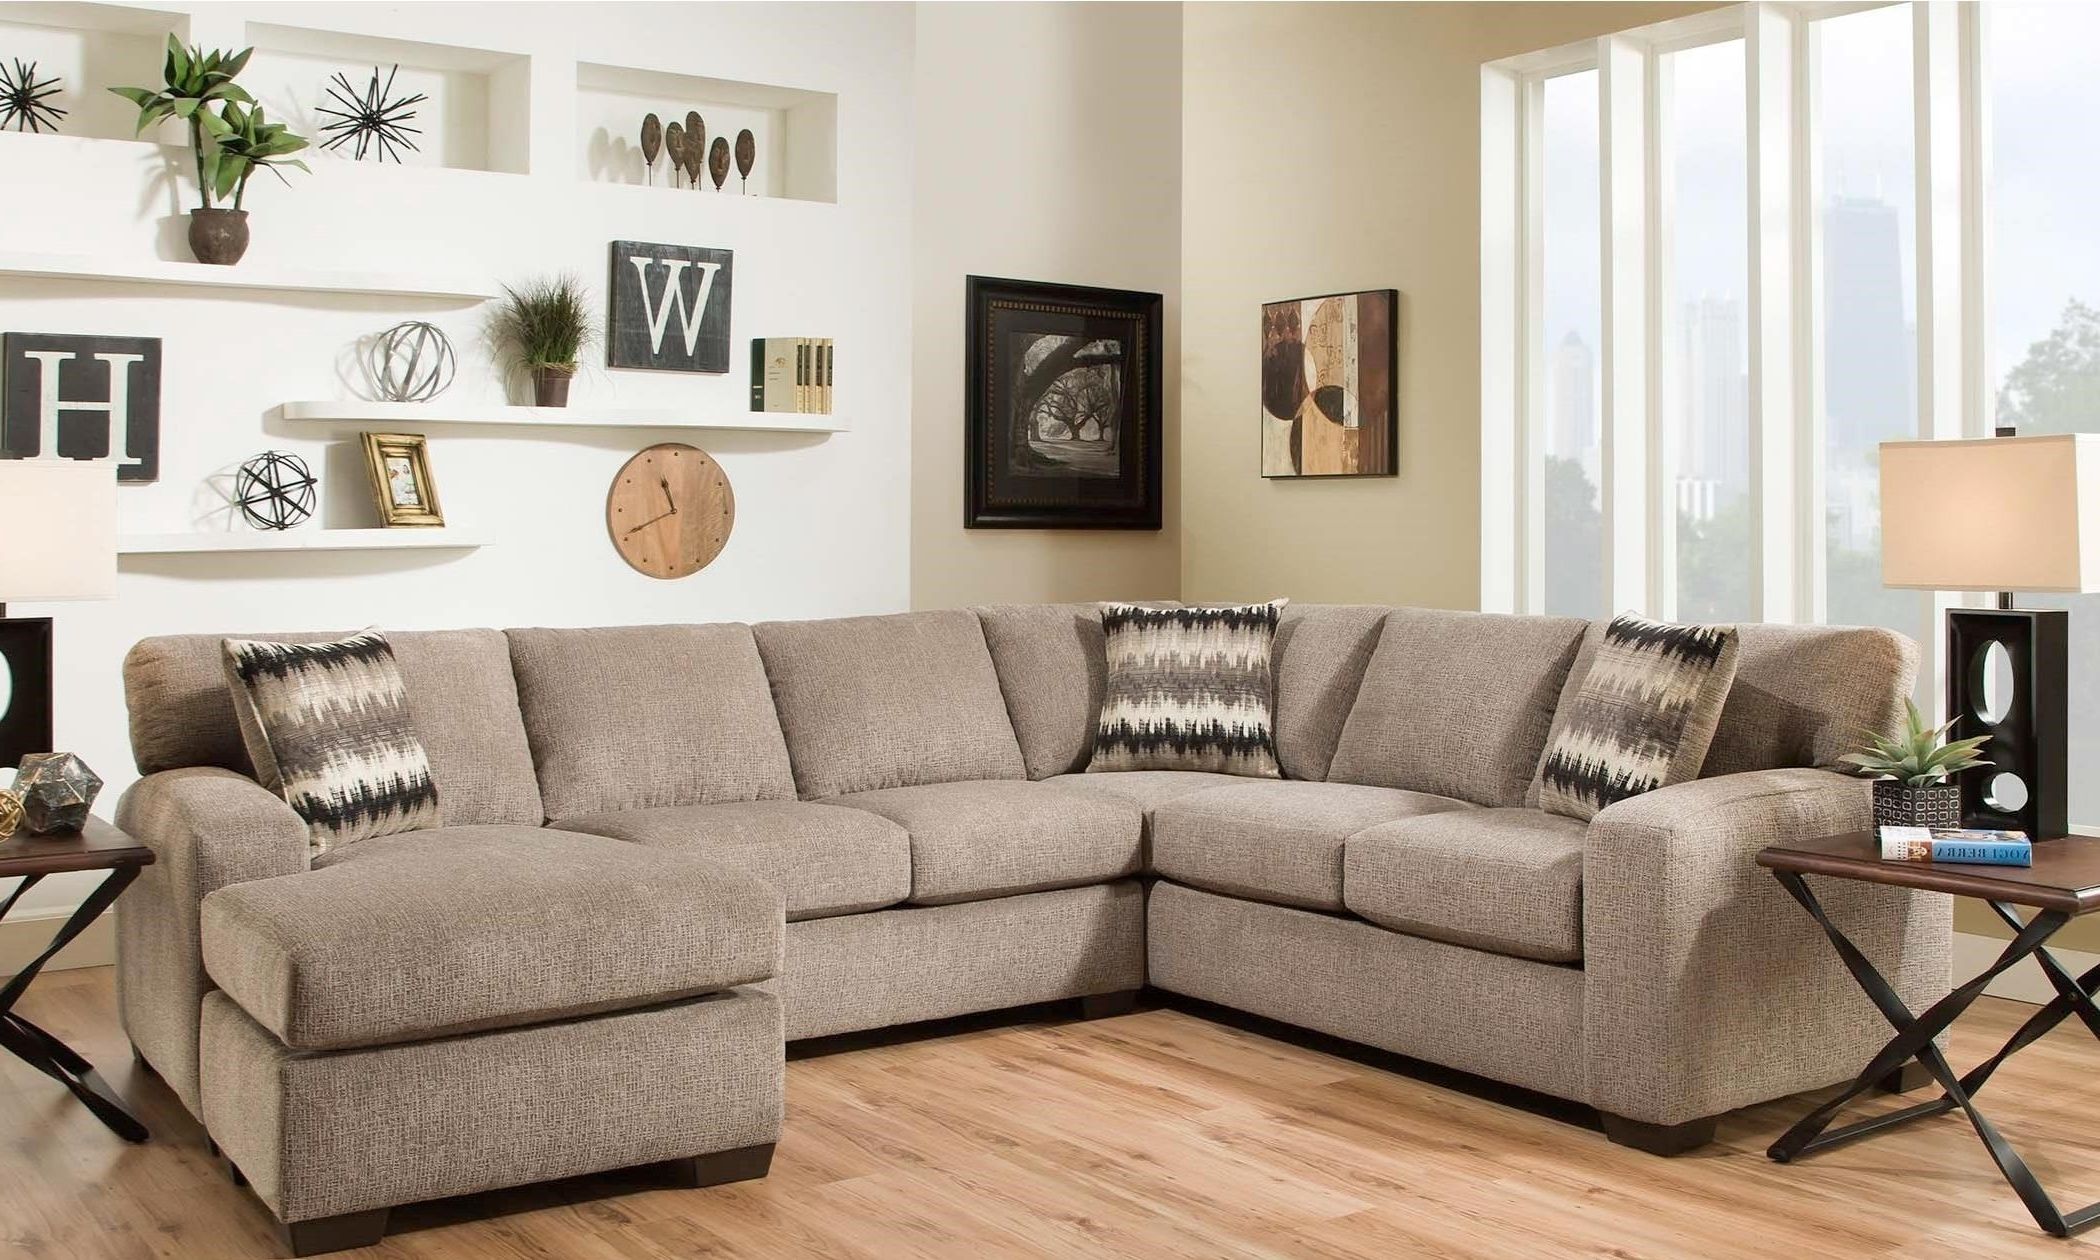 Bay City, Saginaw, Midland, Michigan Sectional For Most Recently Released The Bay Sectional Sofas (View 11 of 20)